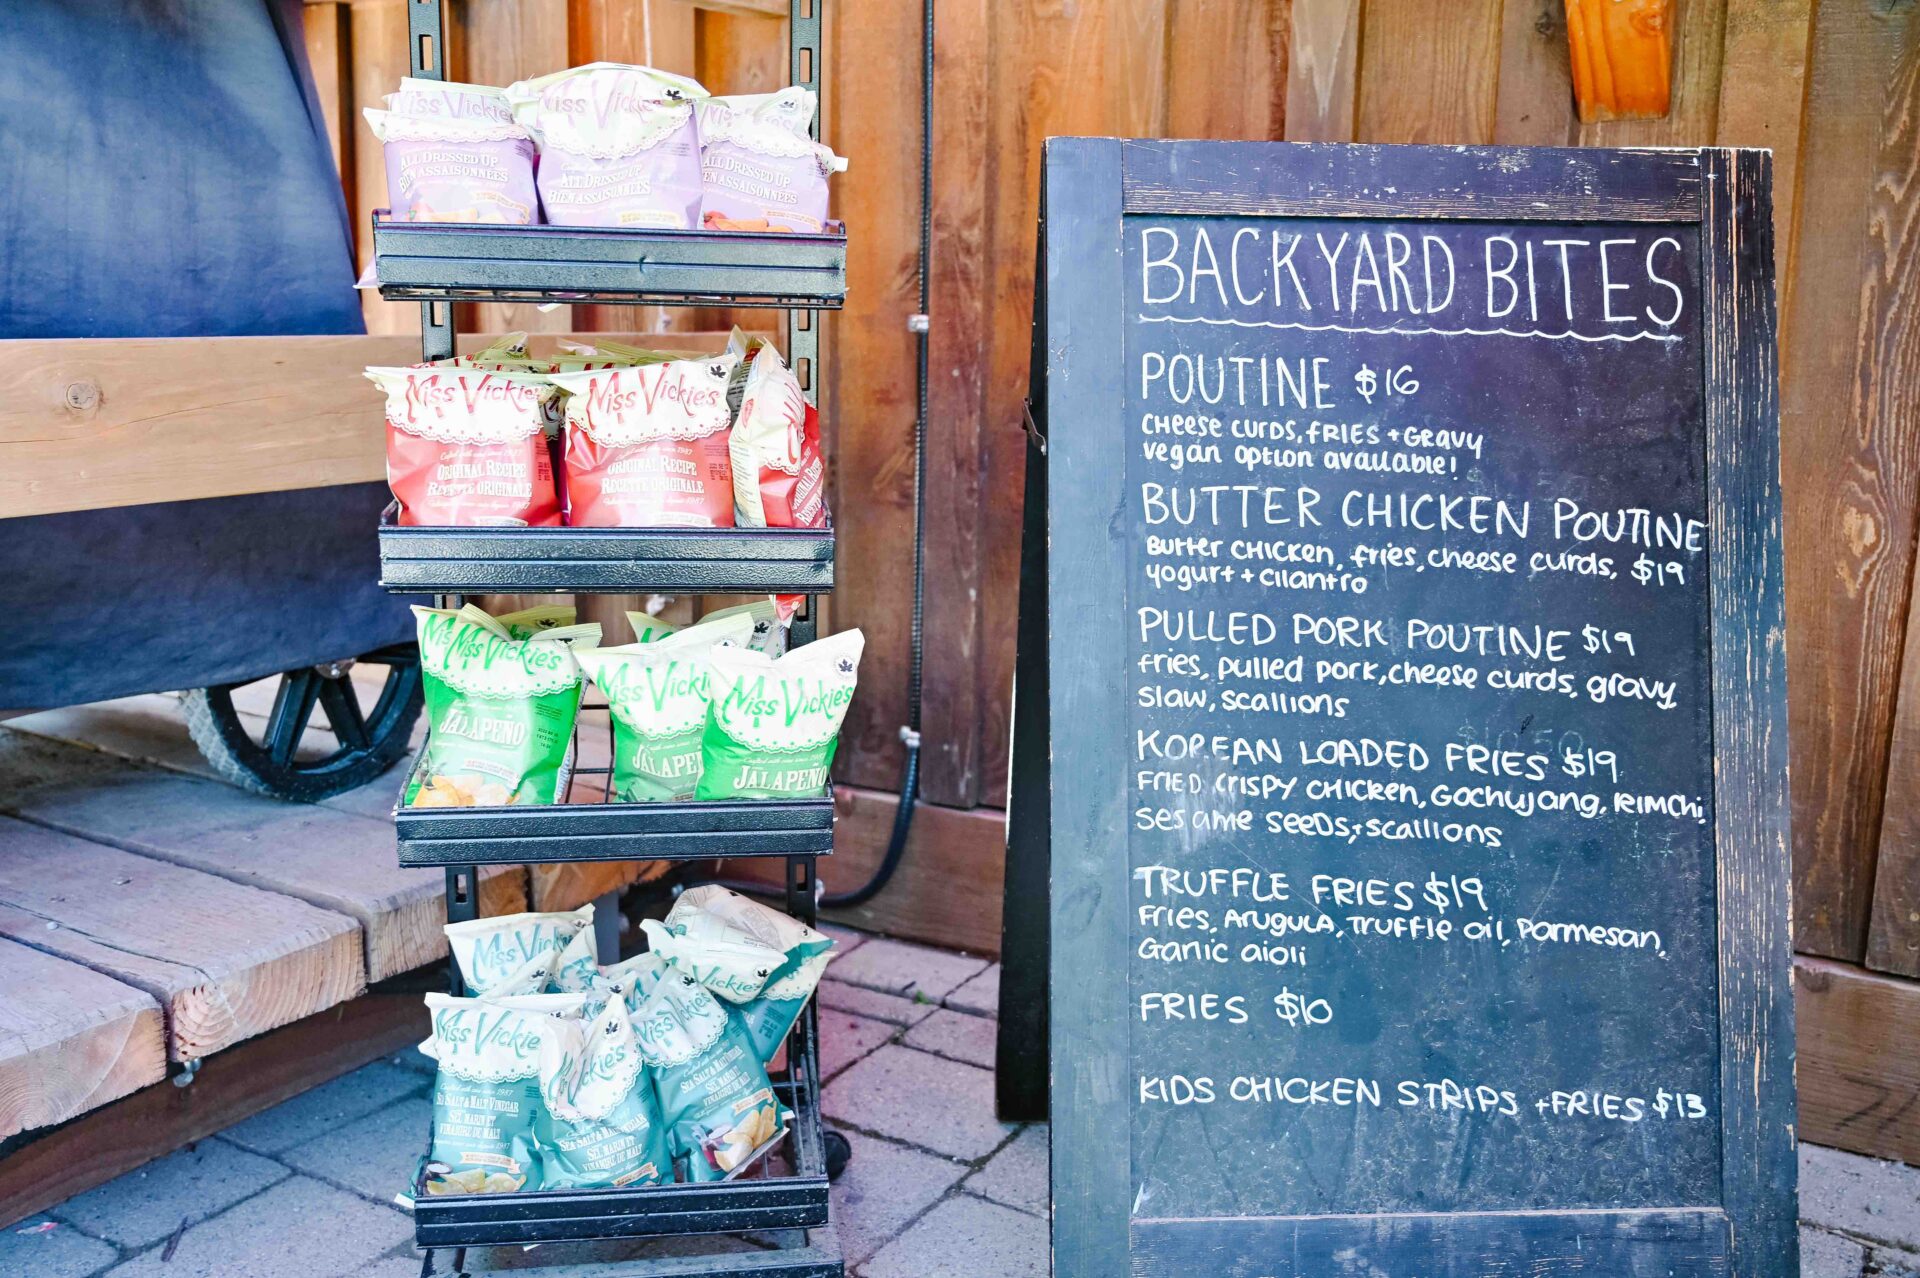 display of chips and a menu board outside the backyard bites food stand